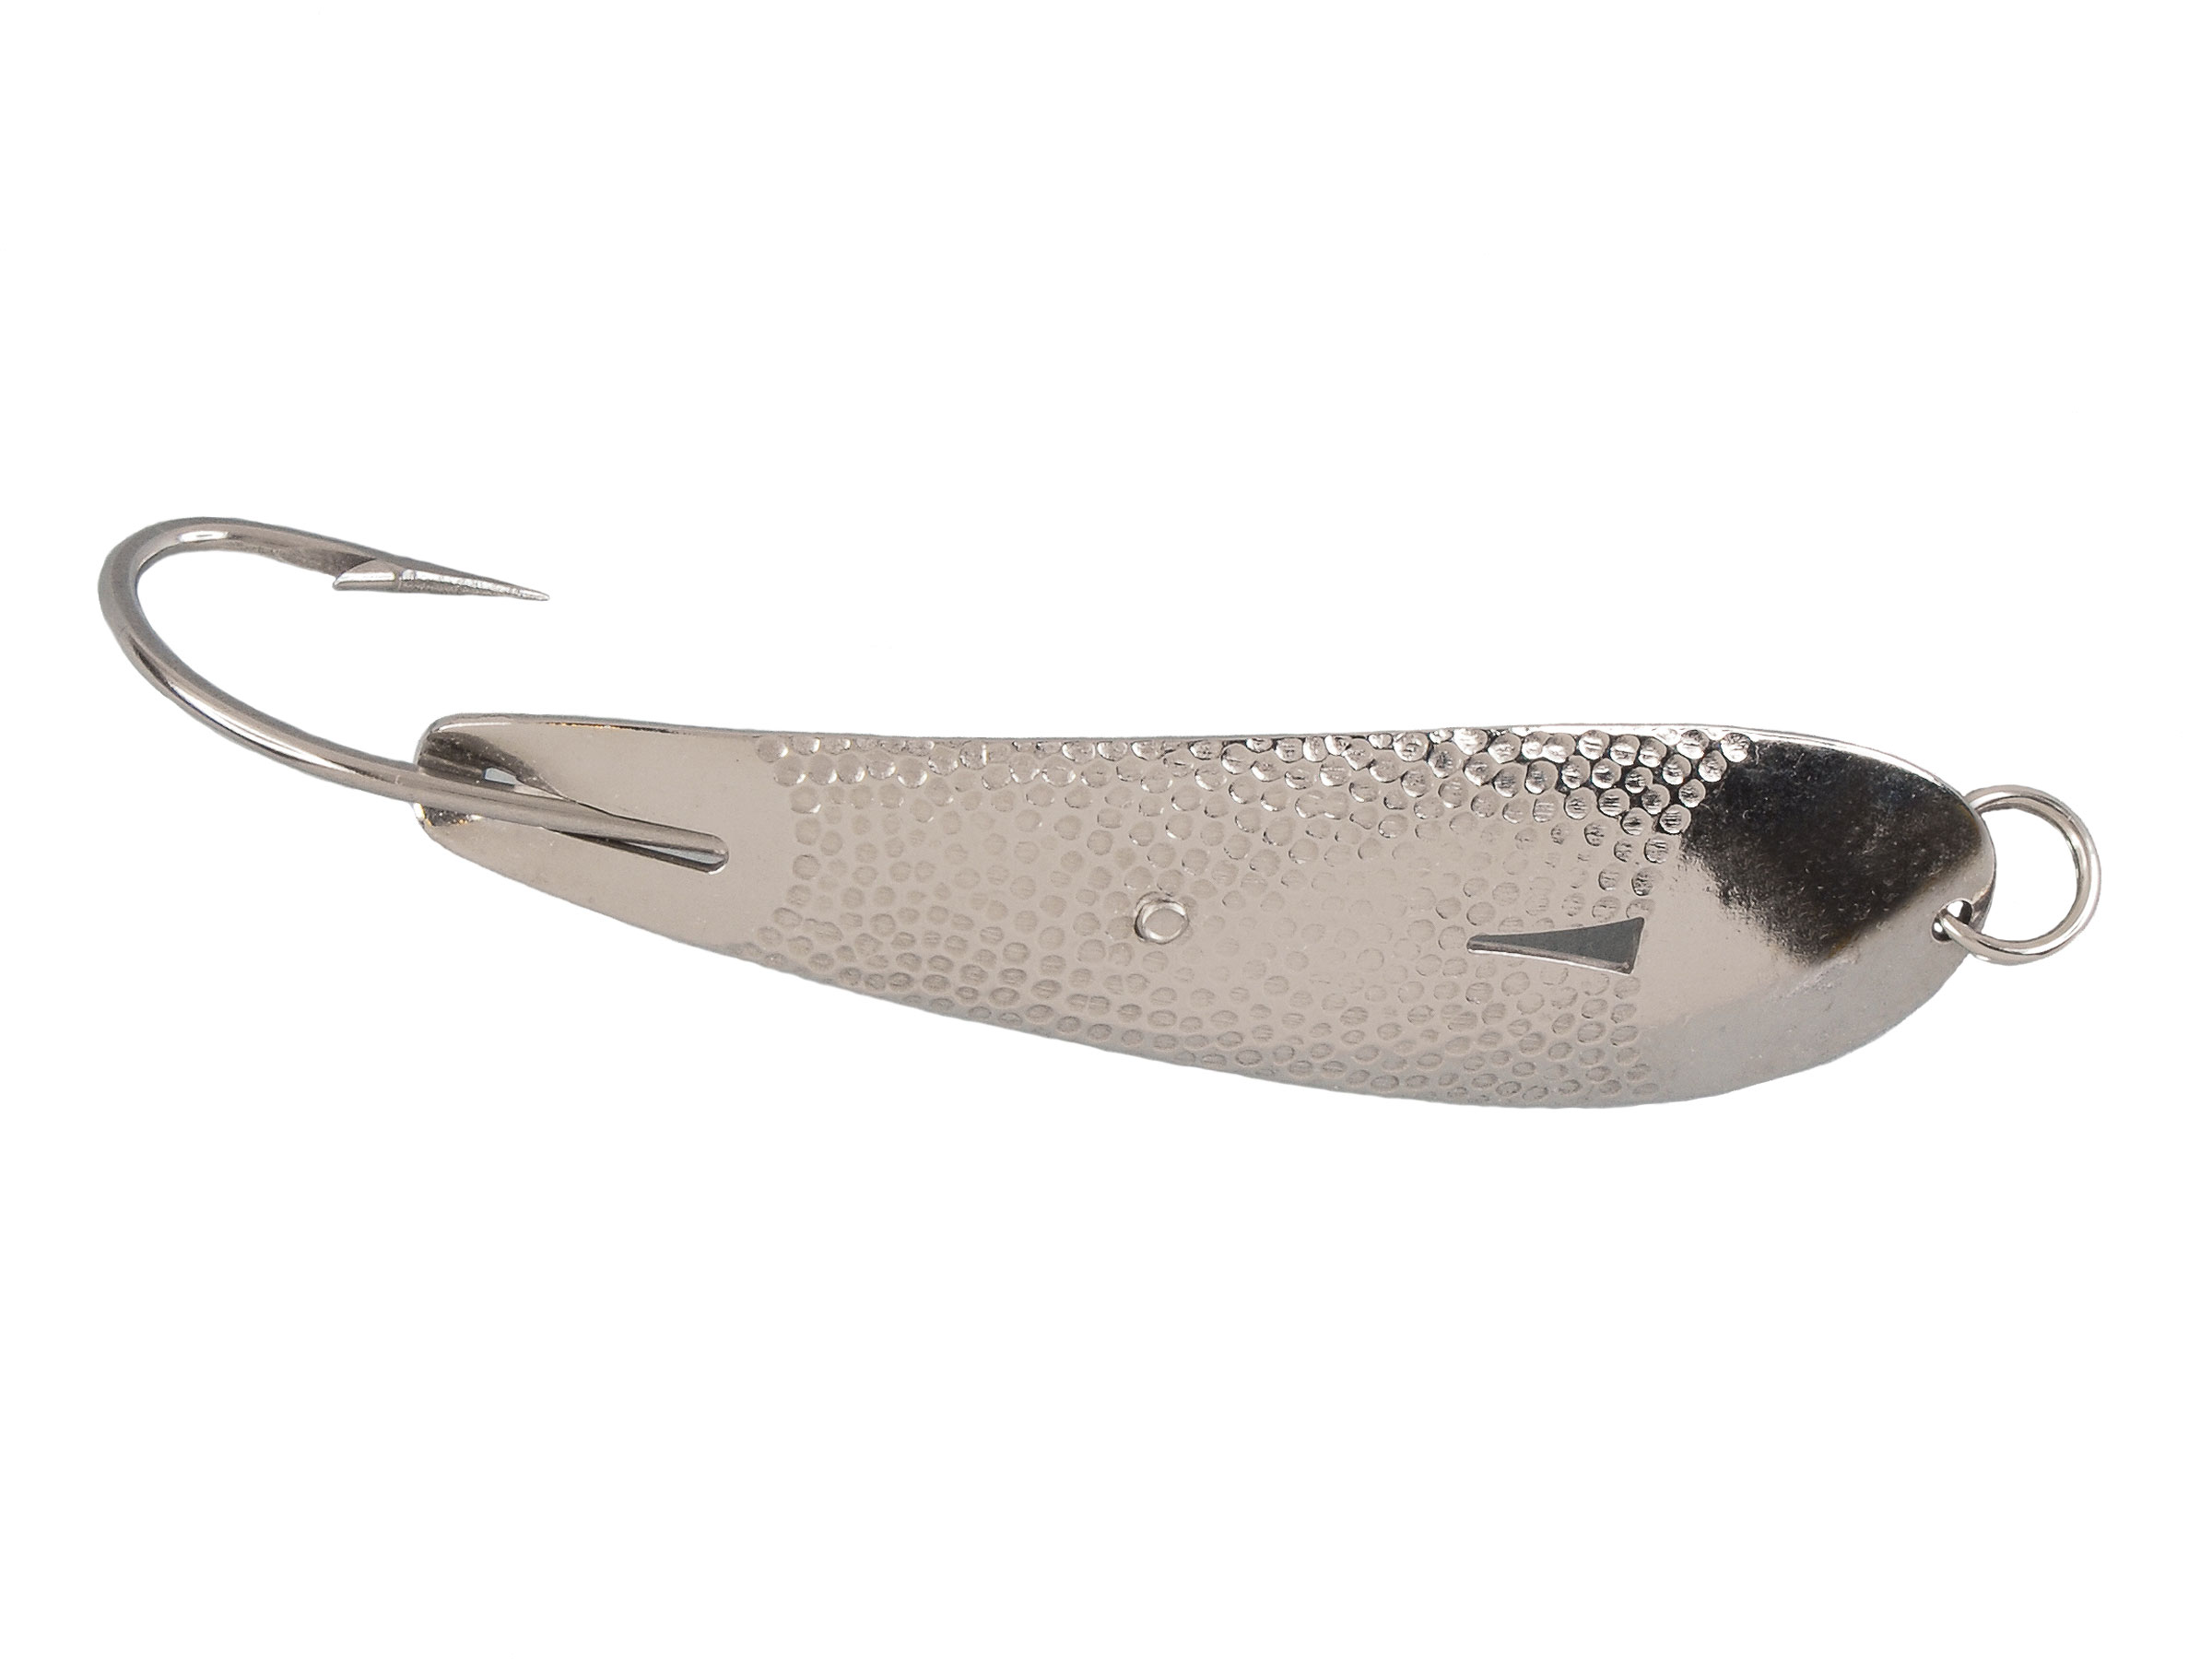 Hammered Spoon – Hopkins Lures